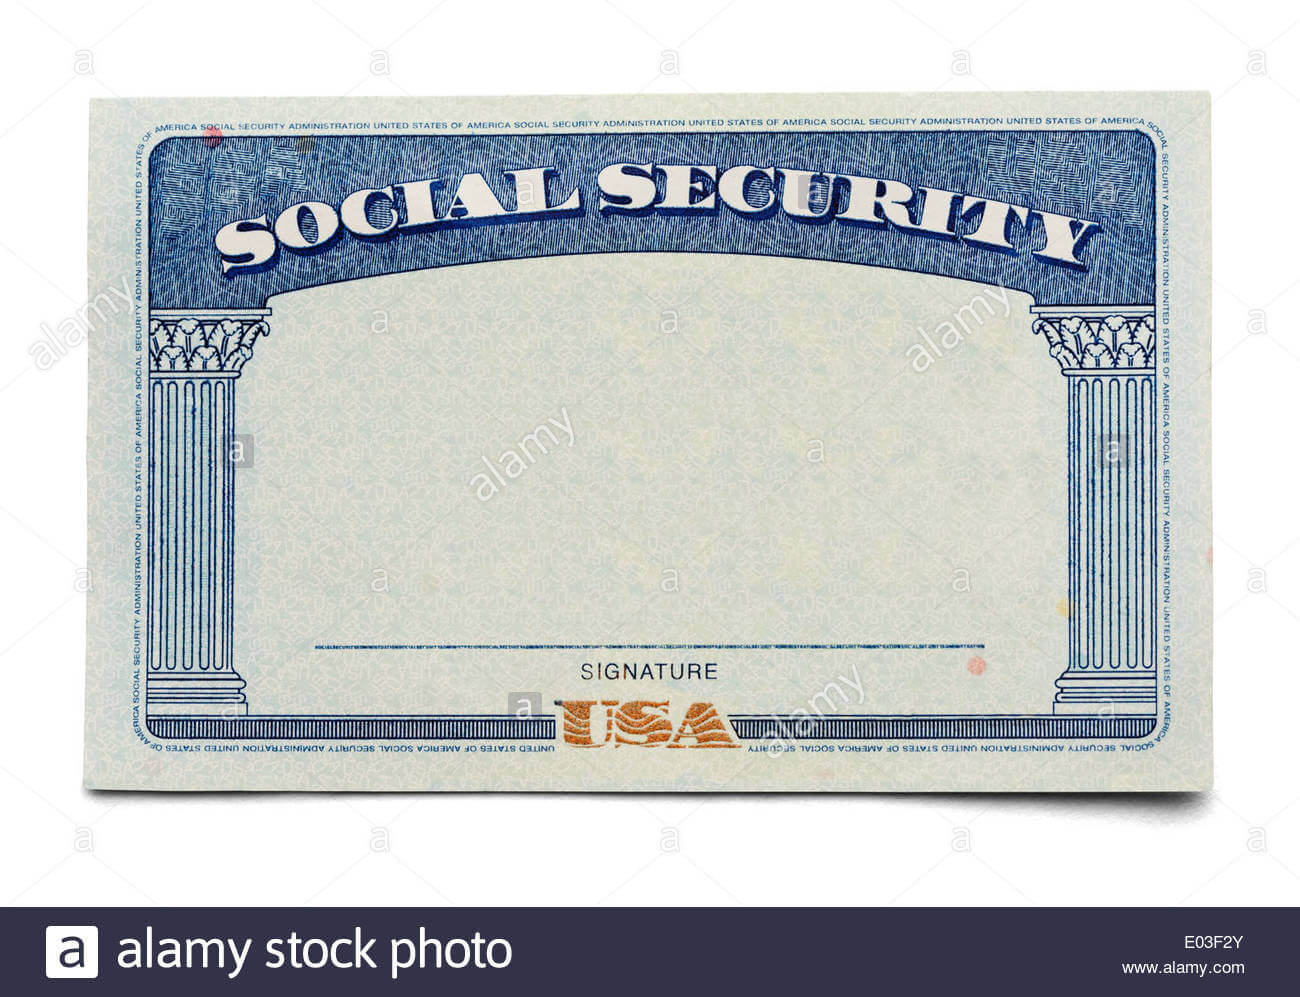 Social Security Stock Photos & Social Security Stock Images Intended For Fake Social Security Card Template Download